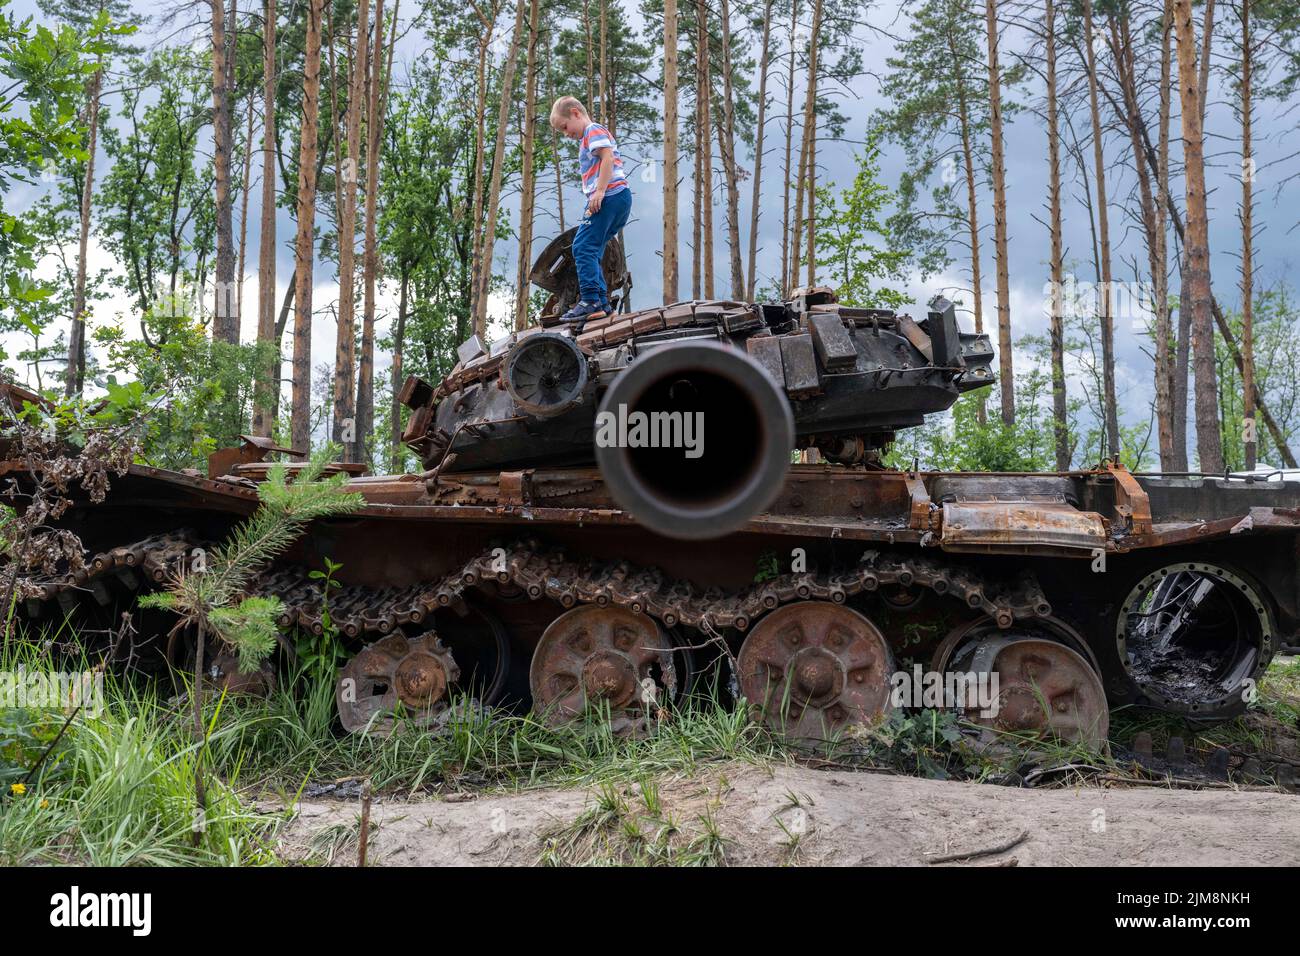 Bucha,Kyiv Oblast Picture shows a local child clambering on a destroyed Russian tank destroyed by Ukranian forces during the Russian invasion Stock Photo